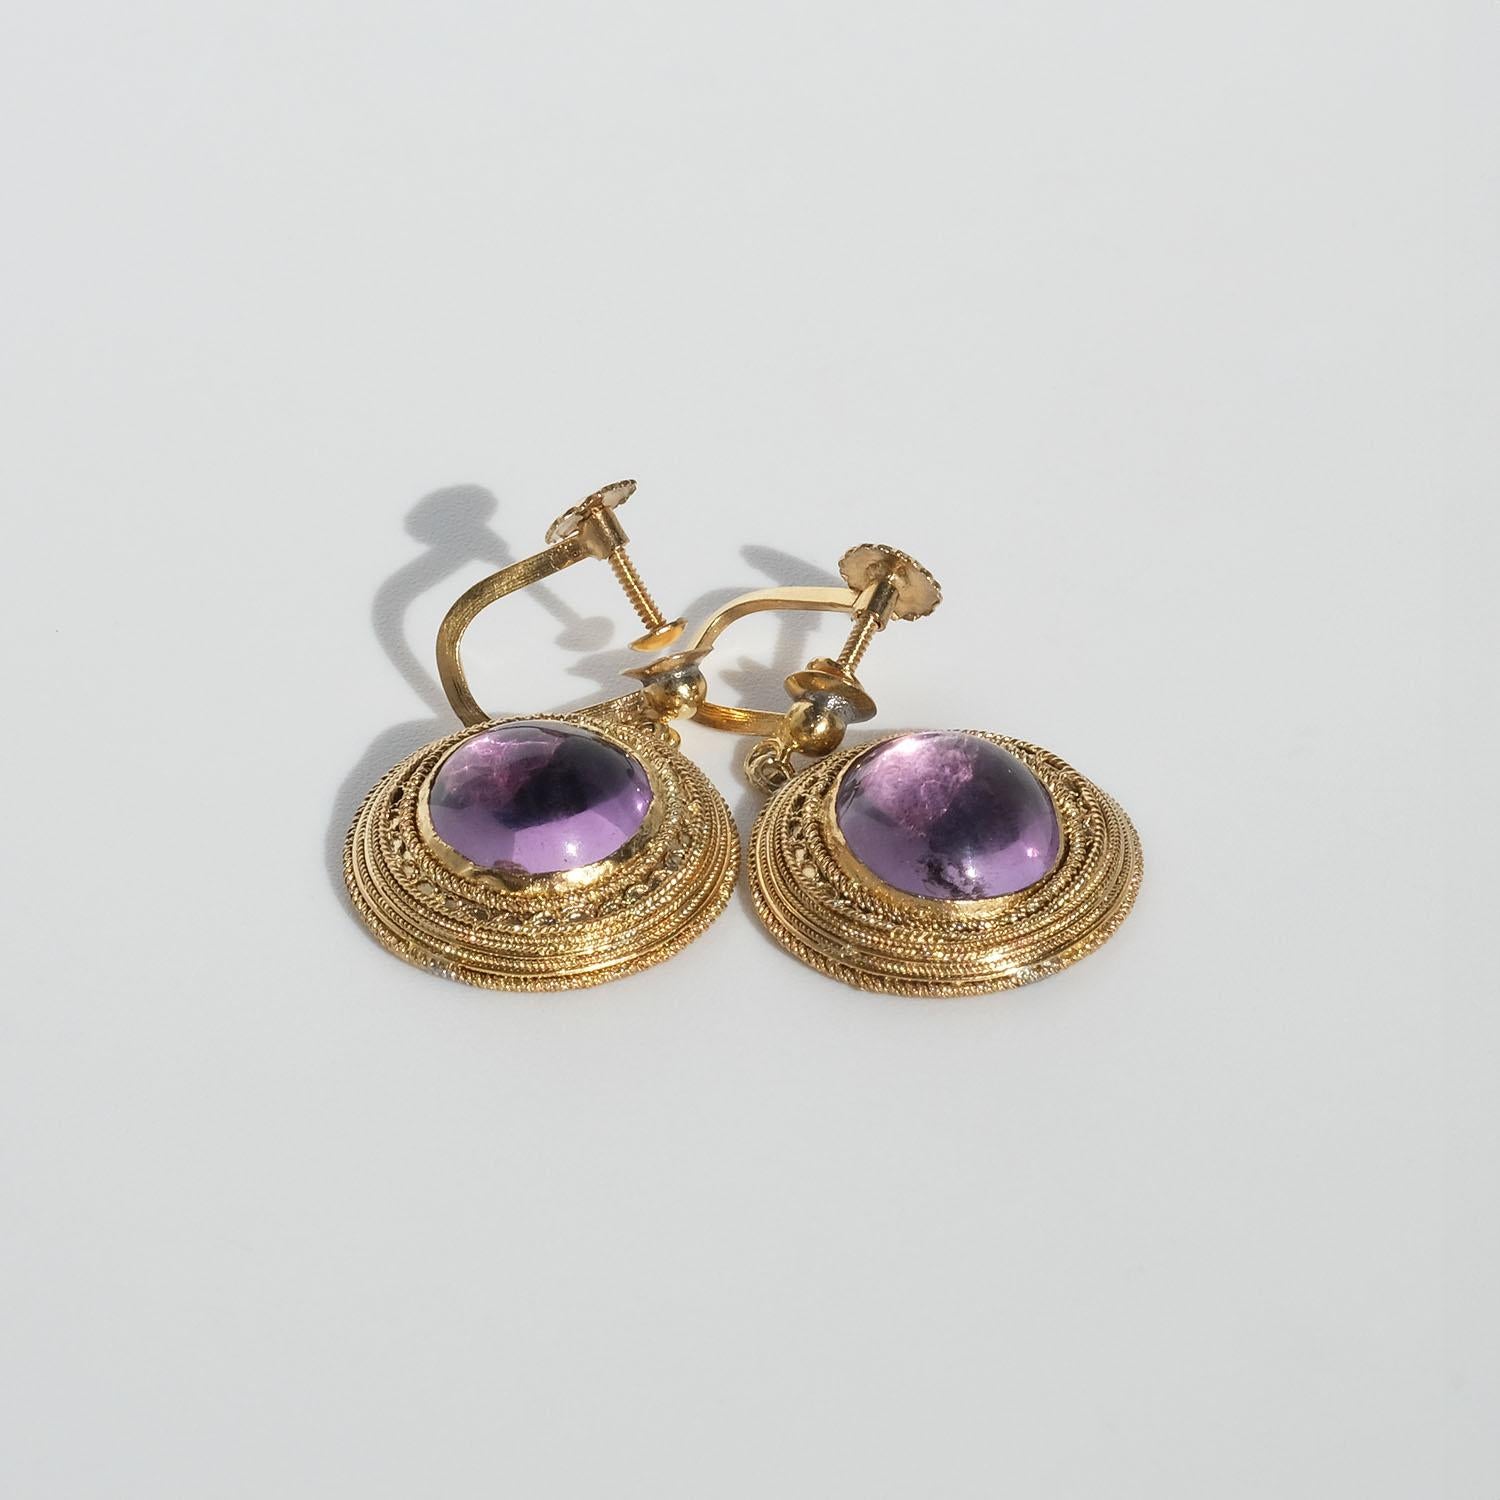 These gilded silver earrings are adorned with cabochon cut amethysts. The framing of the amethysts is beautifully patterned and the earrings have so-called screw backs, like many of the earrings during this period had.

The colourful earrings have a